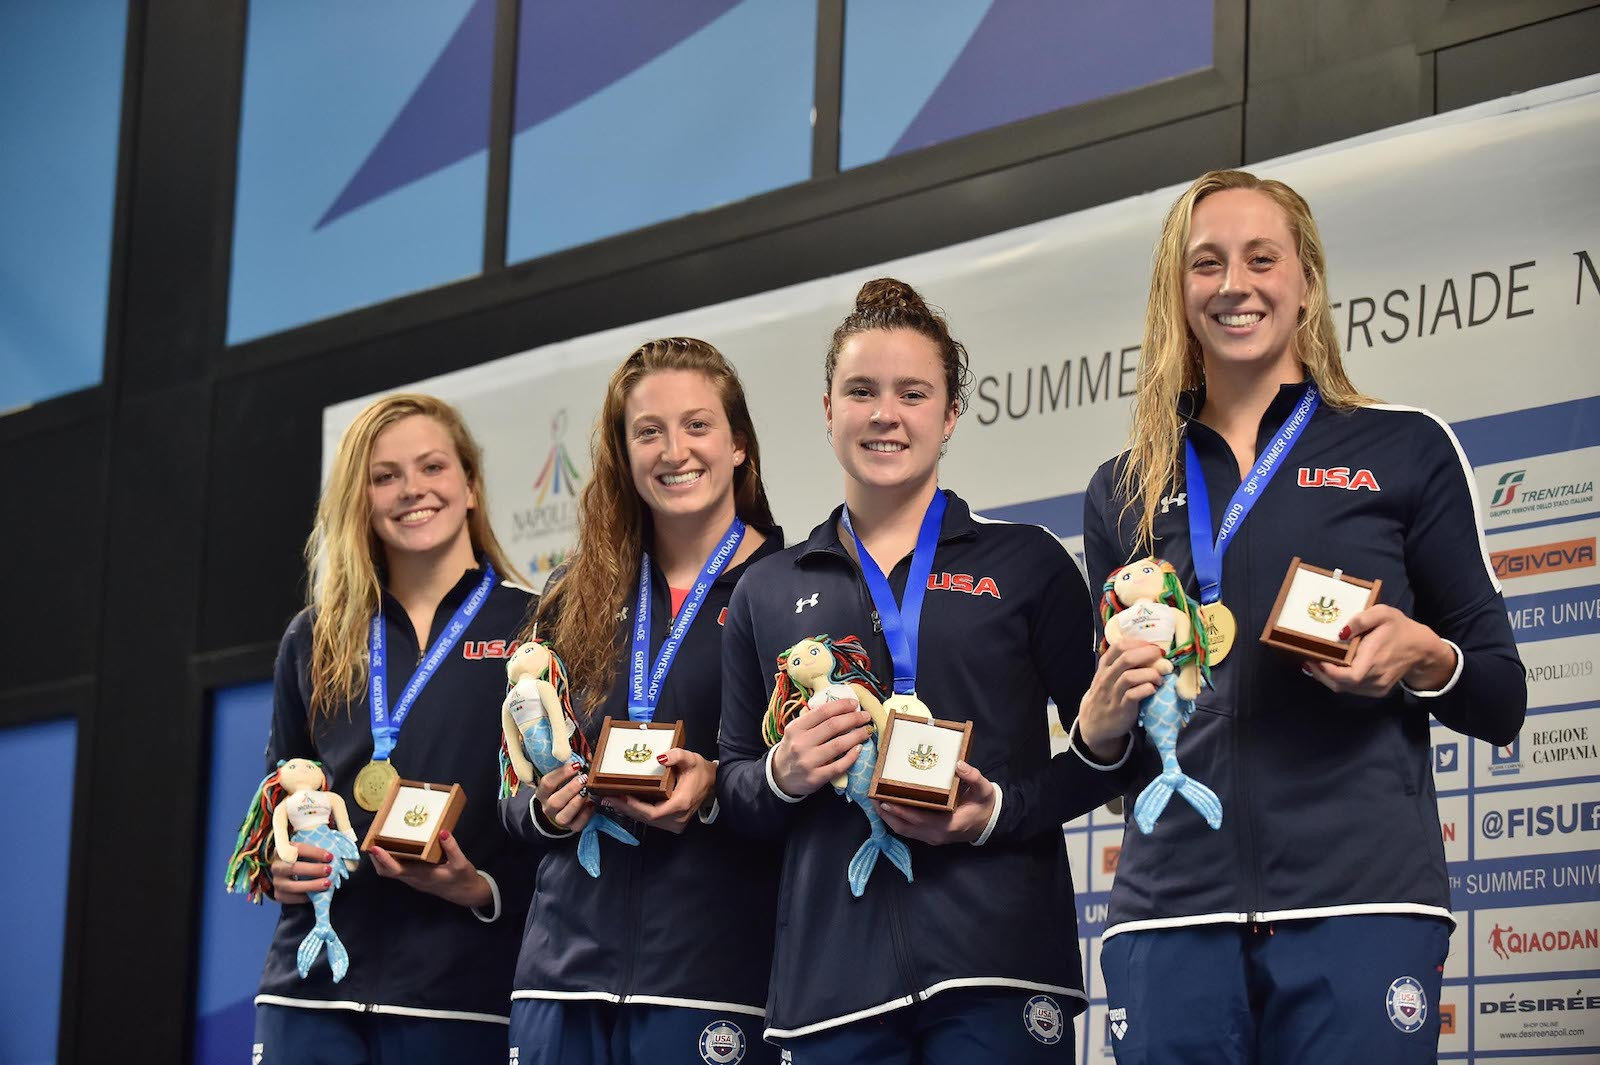 United States swimmers have dominated the World University Games, including at Naples in 2019 when they won 19 gold medals ©Getty Images